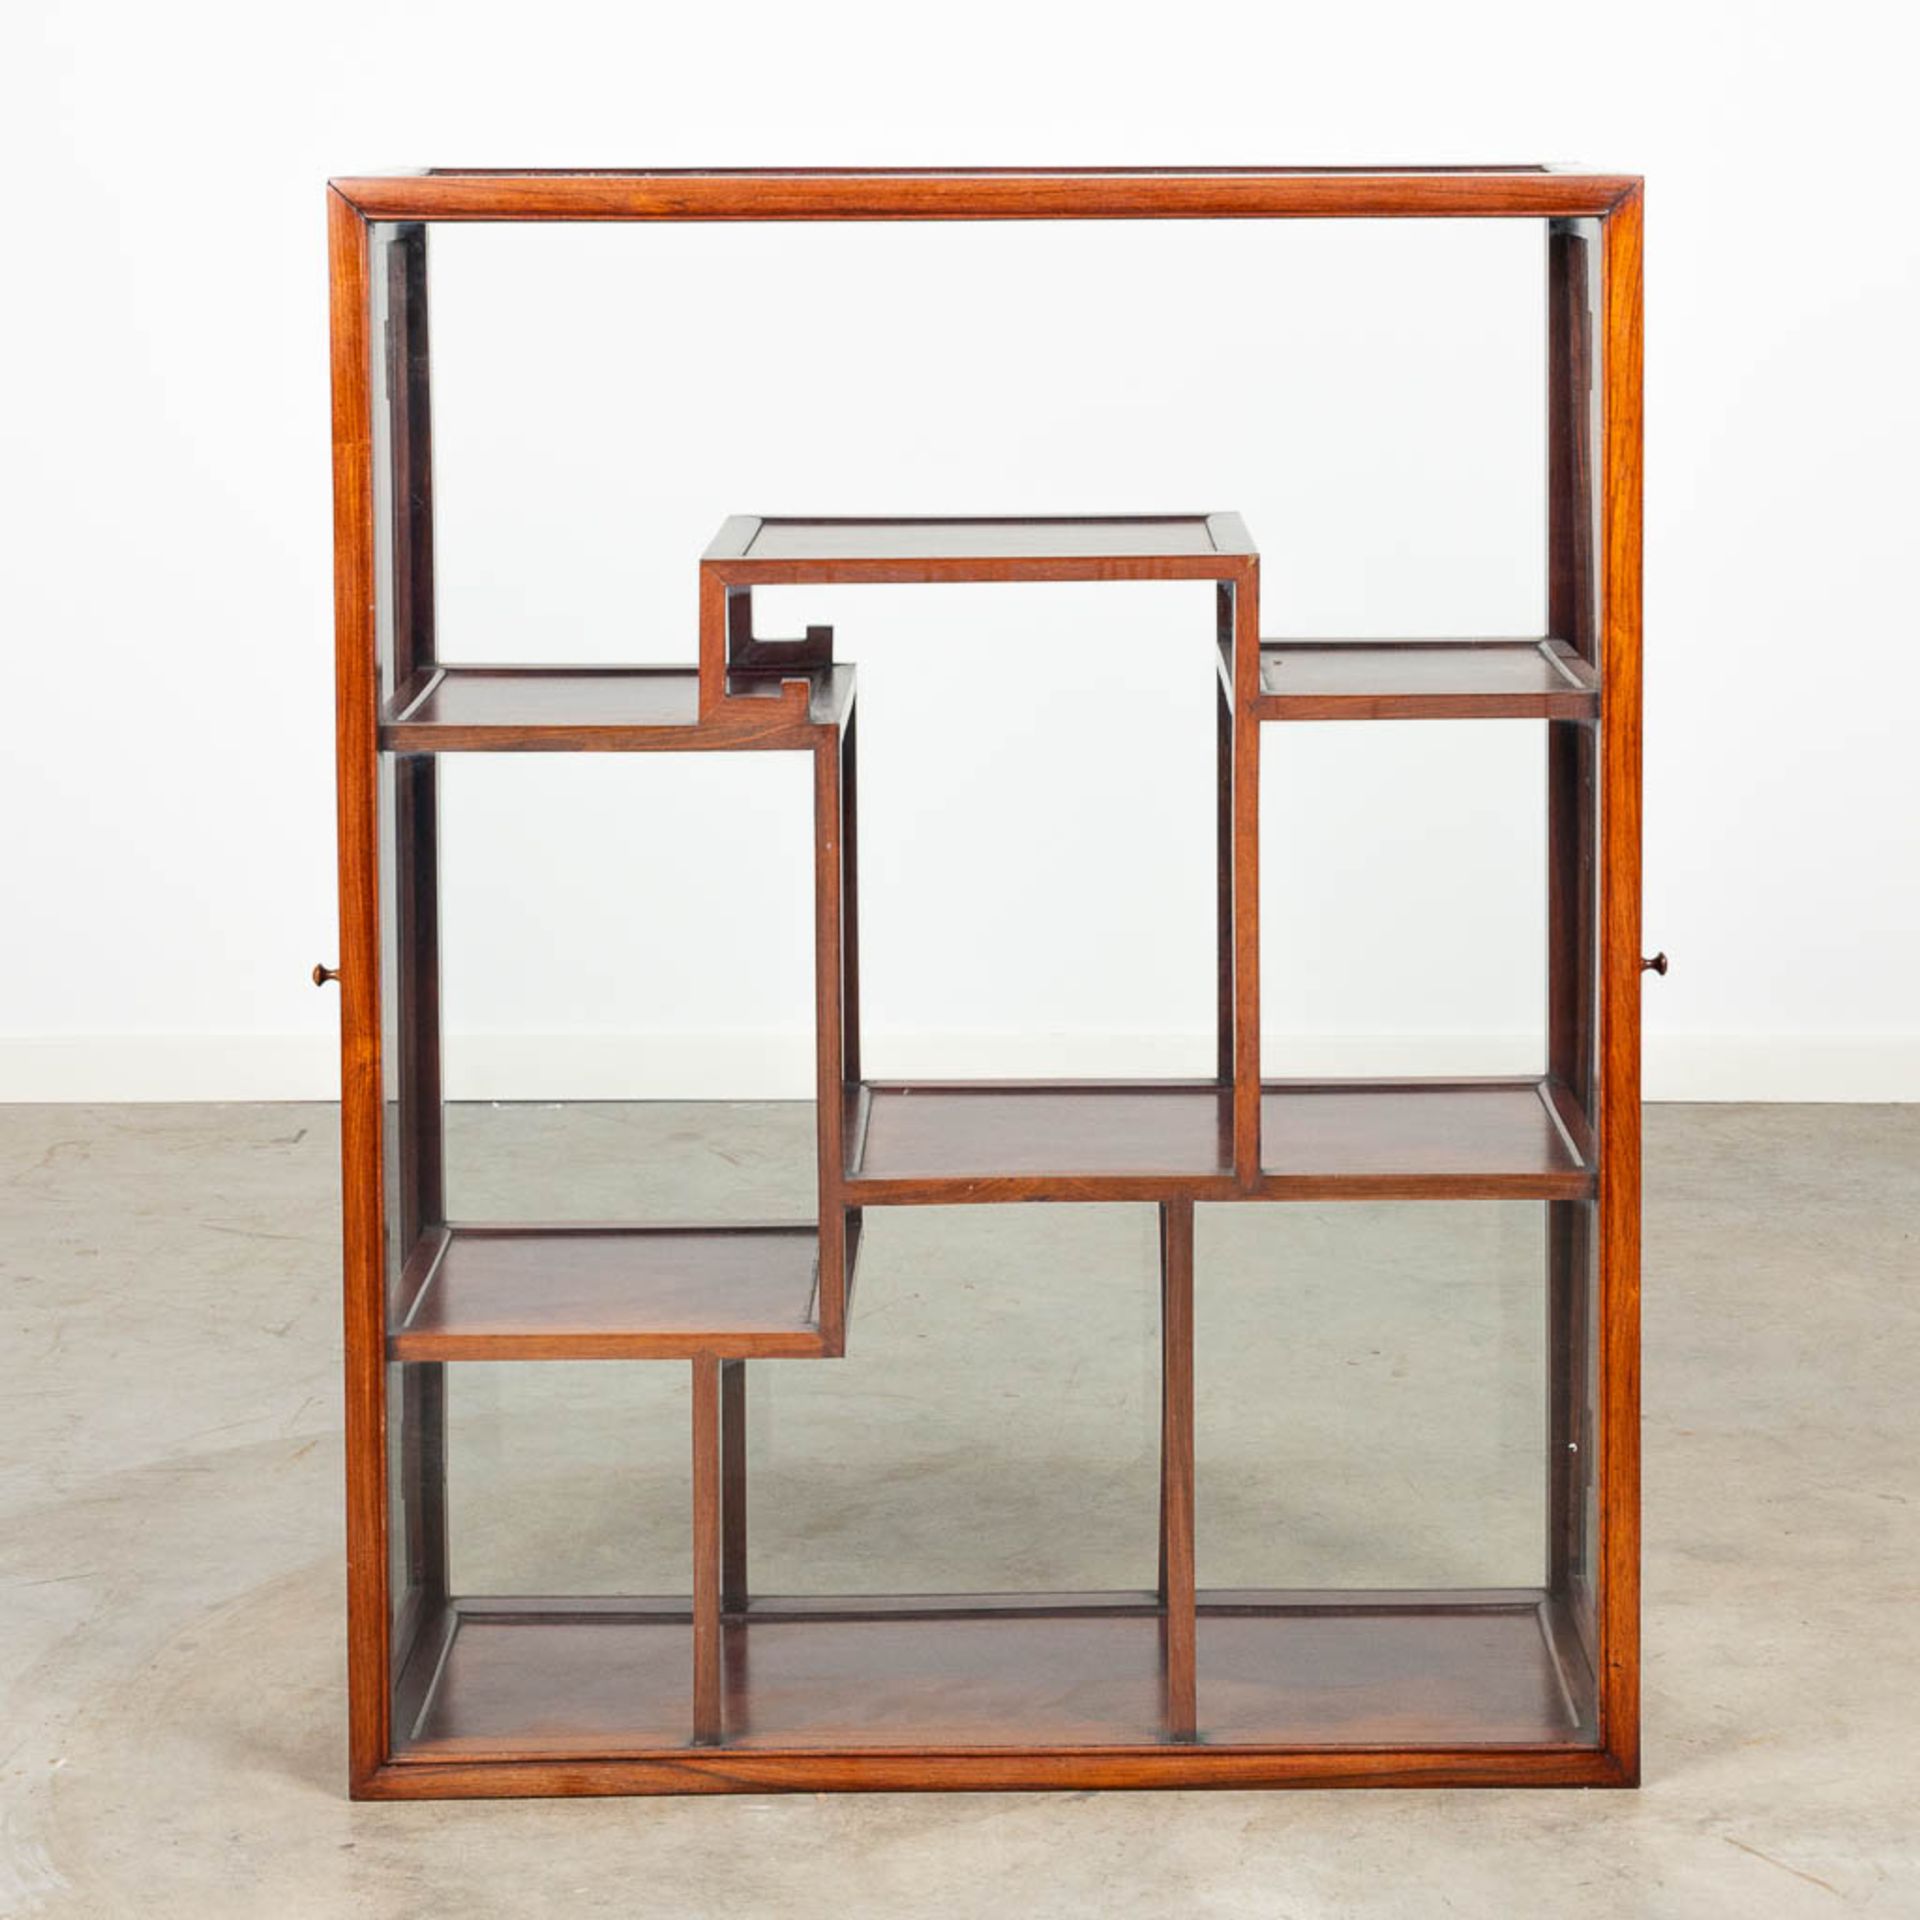 An Oriental display cabinet made of hardwood and glass. - Image 3 of 5